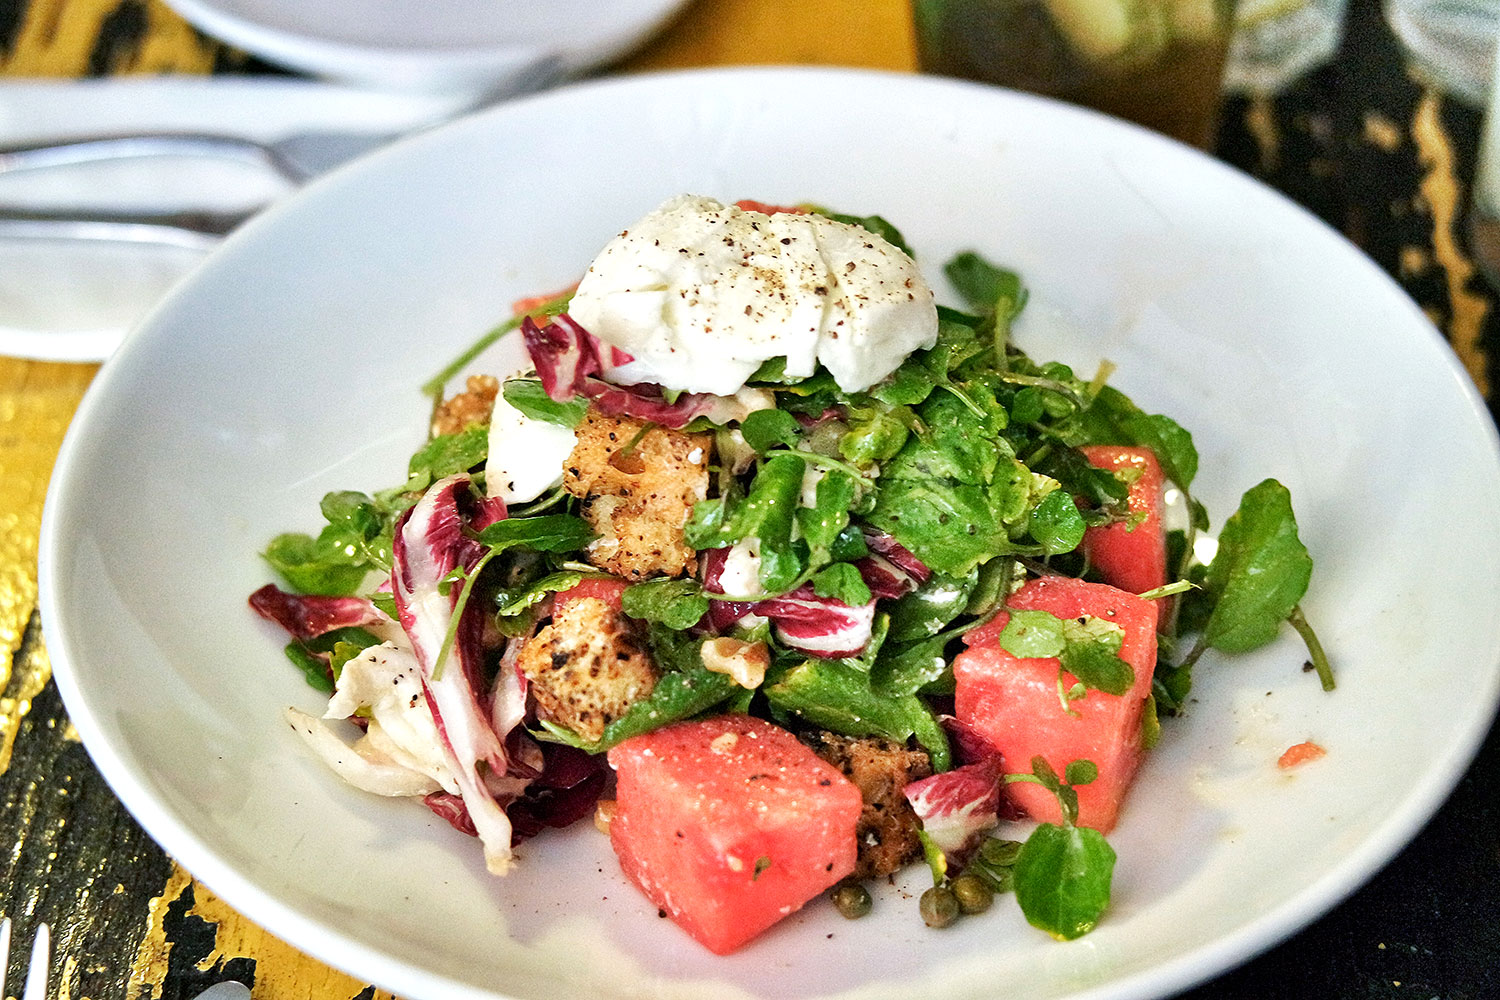 rose-infused watermelon salad with watercress, mozzarella and capers.